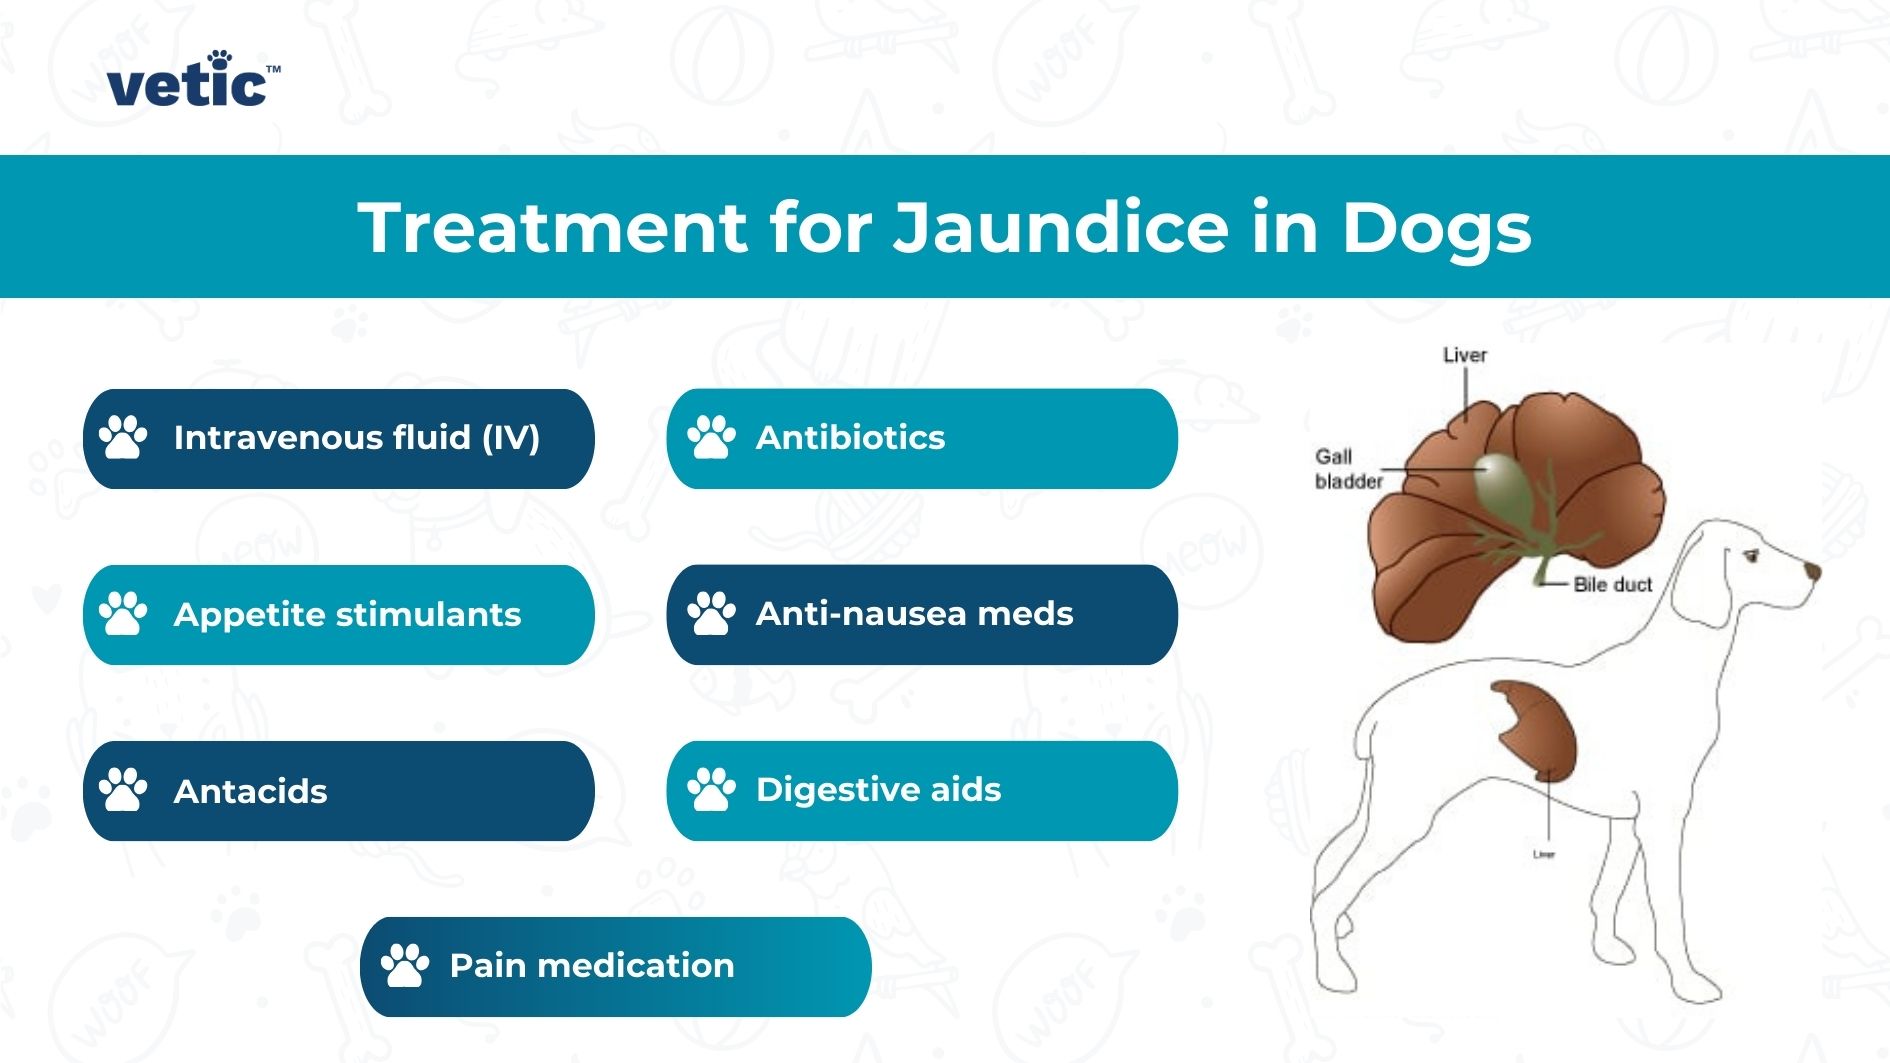 The image is an informational graphic from “vetic” on the treatment for jaundice in dogs. It features a light blue background with faint illustrations of various dog breeds. The title “Treatment for Jaundice in Dogs” is prominently displayed at the top. Below the title are six blue paw print icons each followed by different types of treatments written in white text inside dark blue bubbles. Treatments listed: Intravenous fluid (IV), Antibiotics, Appetite stimulants, Anti-nausea meds, Antacids, Digestive aids. Below these treatments is an icon of a pill followed by “Pain medication.” On the right side is an illustration of a dog with its internal organs like liver and gall bladder visible. Labels indicate parts such as Liver, Gall bladder and Bile duct. The liver is depicted in brown color.